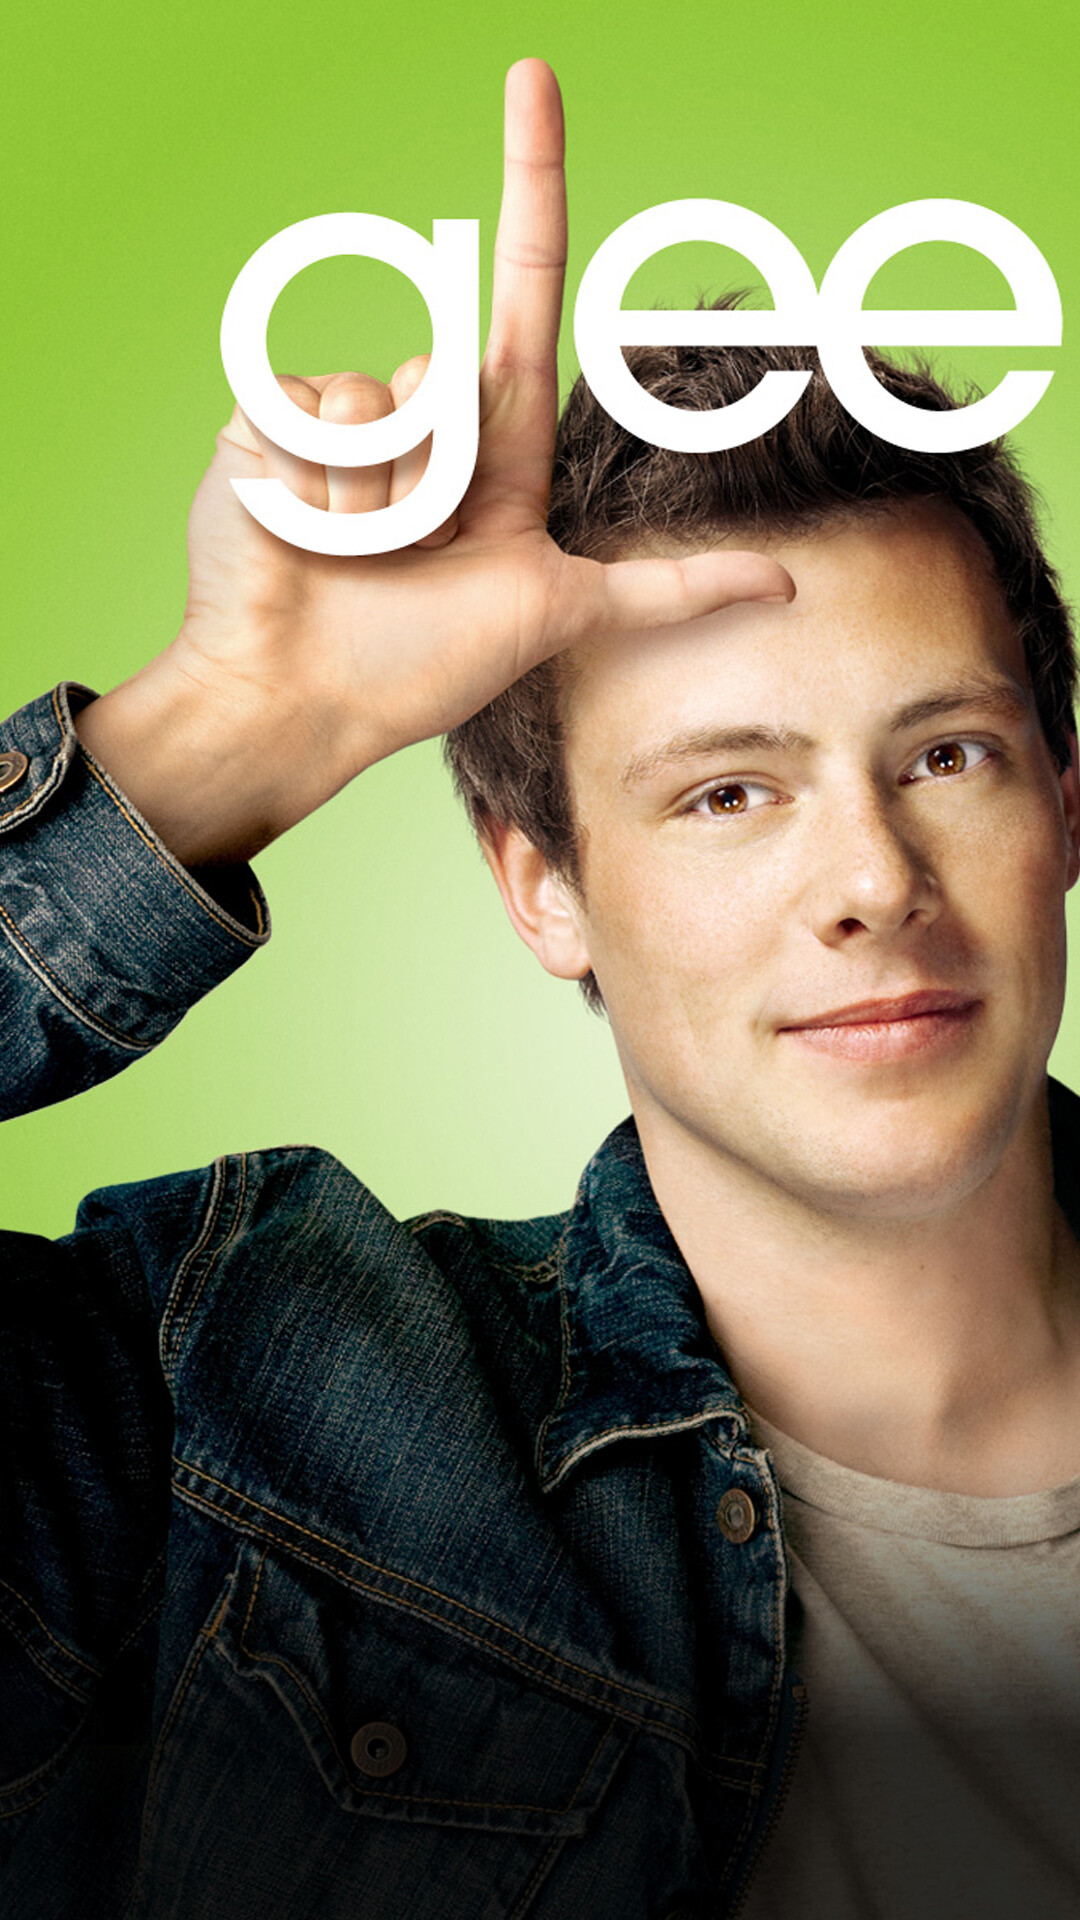 Glee (TV series): Finn Christopher Hudson, One of the most popular students at McKinley. 1080x1920 Full HD Background.